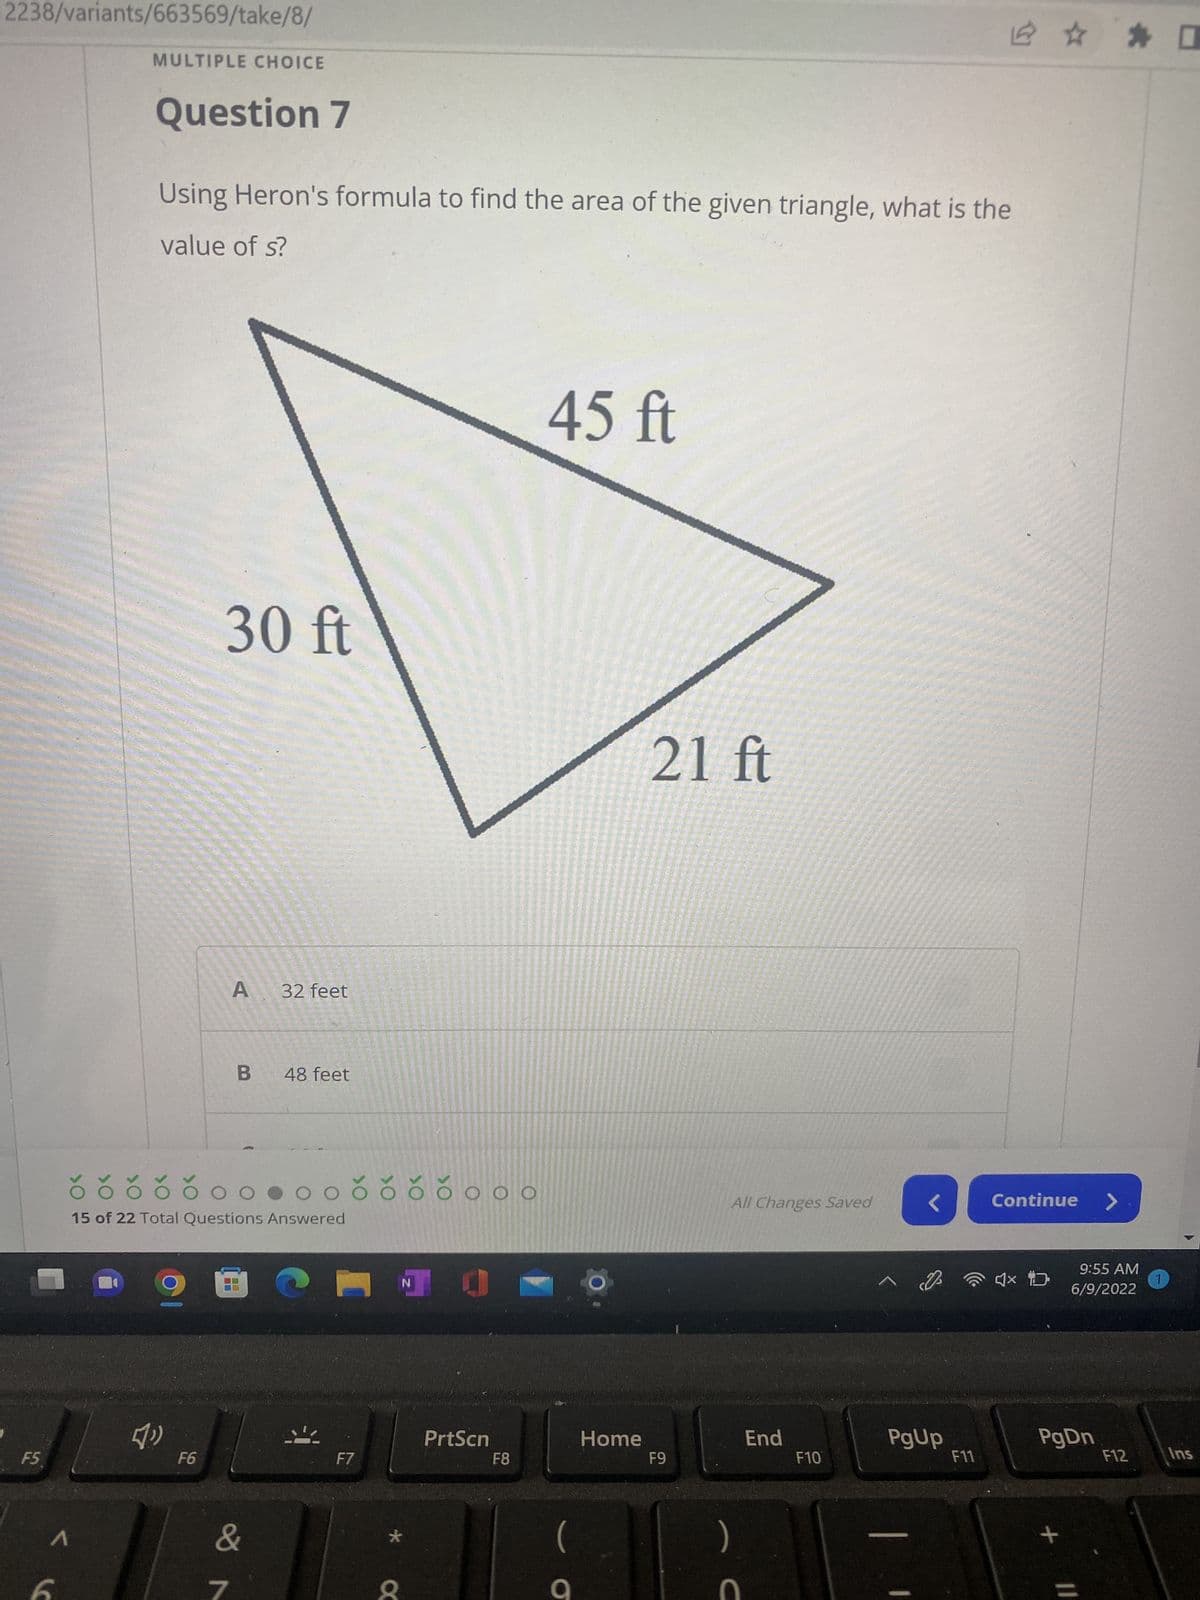 2238/variants/663569/take/8/
MULTIPLE CHOICE
Question 7
Using Heron's formula to find the area of the given triangle, what is the
value of s?
45 ft
F5
1
30 ft
A
32 feet
B
48 feet
õõčŏoo.ooč čččo o o
15 of 22 Total Questions Answered
N
{"
>O
F6
&
7
F7
X
PrtScn
F8
Home
21 ft
F9
All Changes Saved
End
)
C
F10
PgUp
F11
Continue >
4x D
9:55 AM
6/9/2022
PgDn
+
=
F12
1
口
Ins